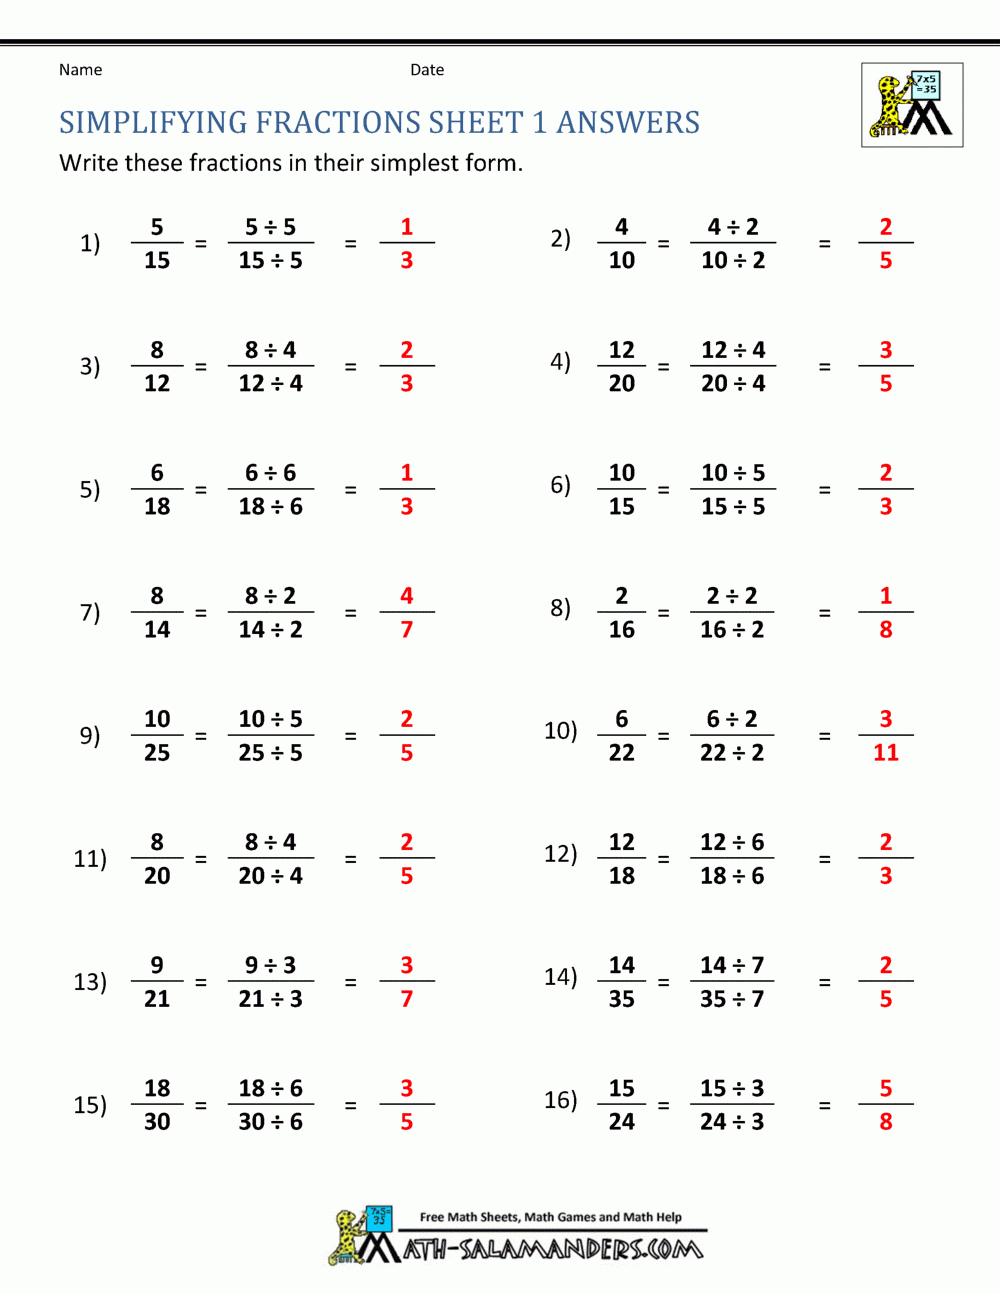 Simplifying Fractions Worksheet With Answers Db excel